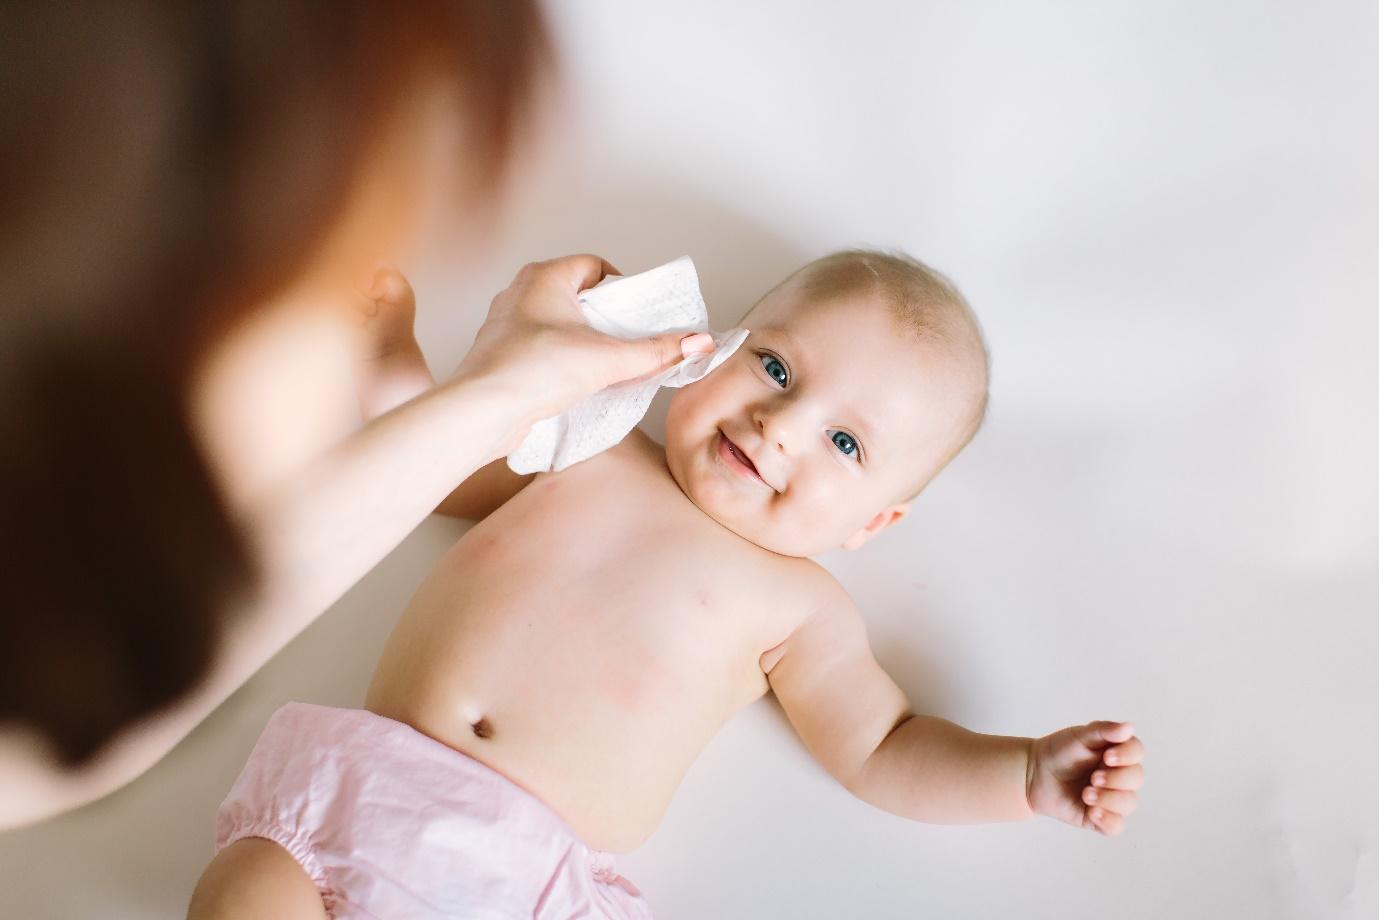 Baby Wipes To Clean Your Little One 